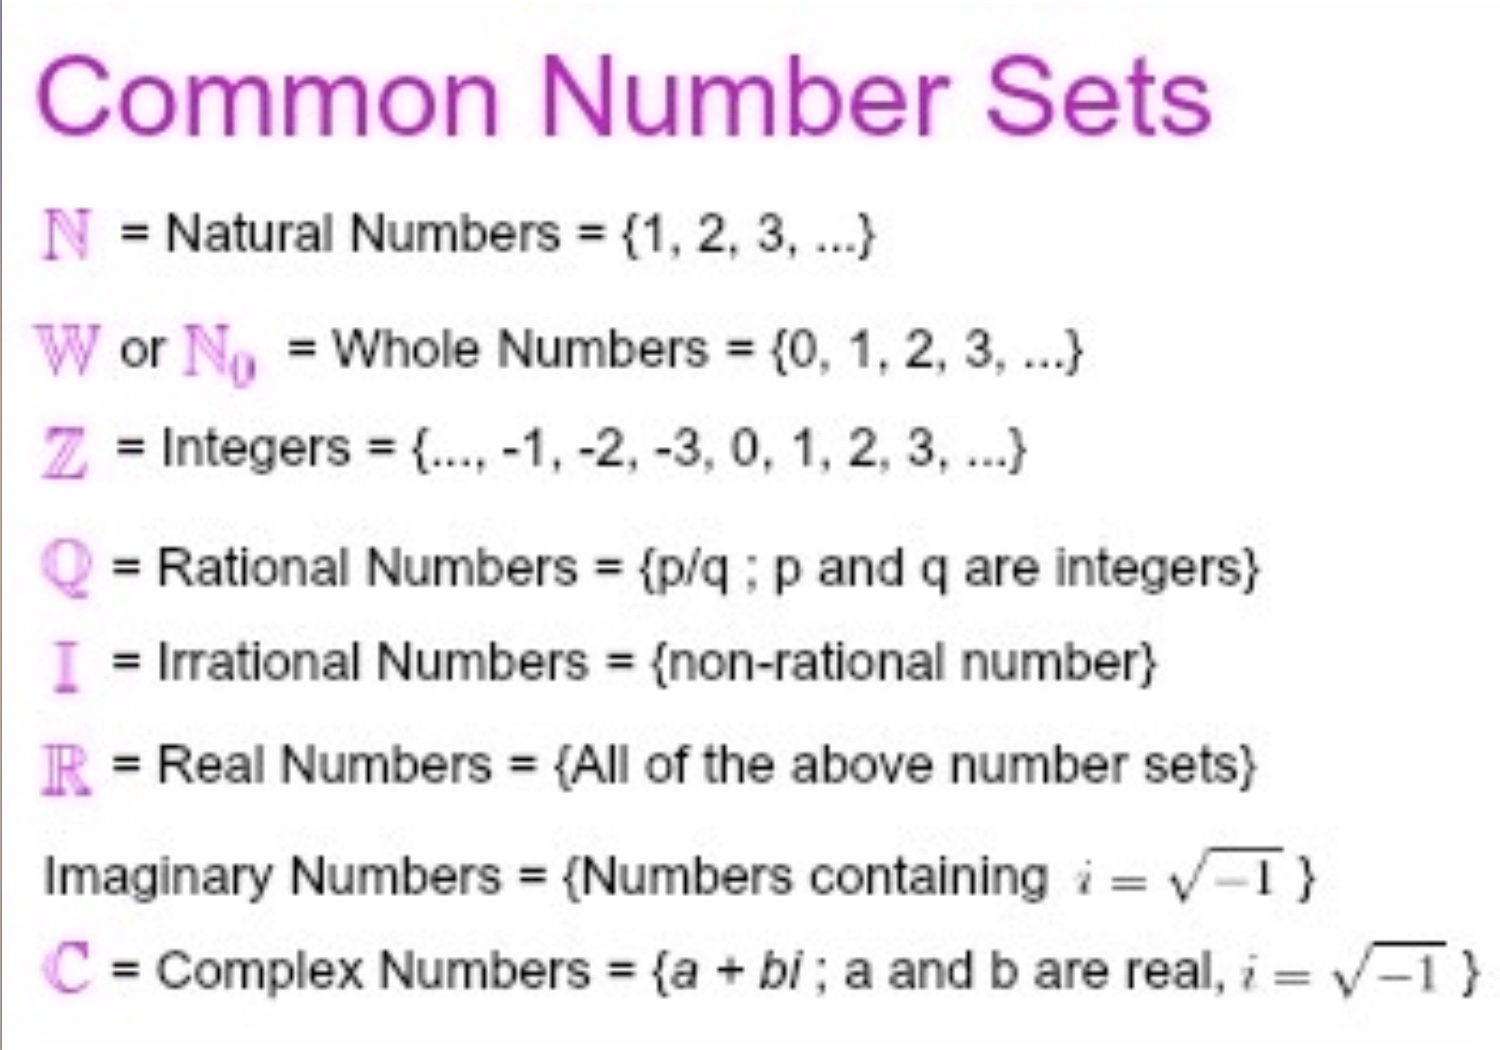 <p>any number that cannot be written in fraction form. Q with a - on top = a set of irrational number</p>